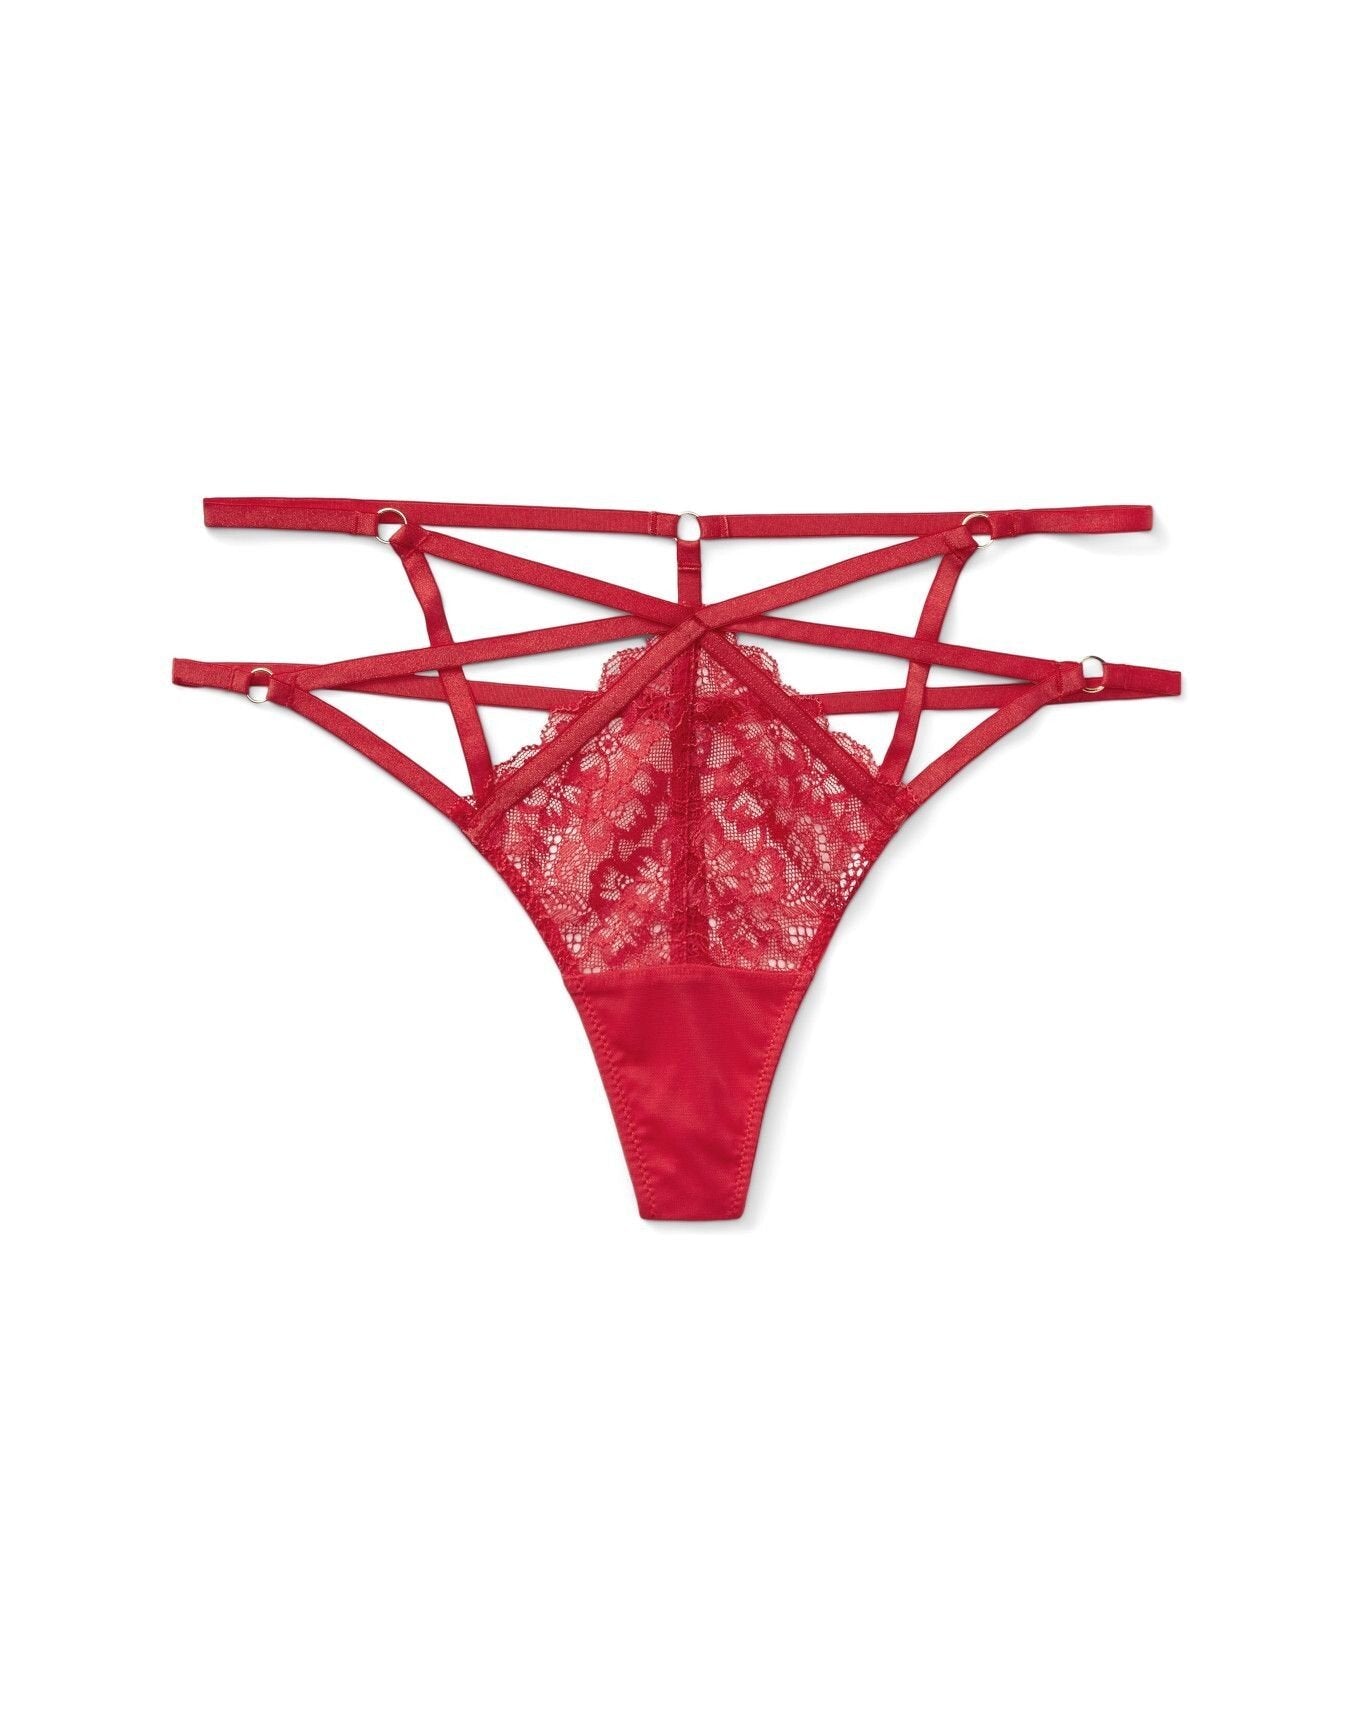 Adore Me Vianna G-String in color Poinsettia and shape g-string